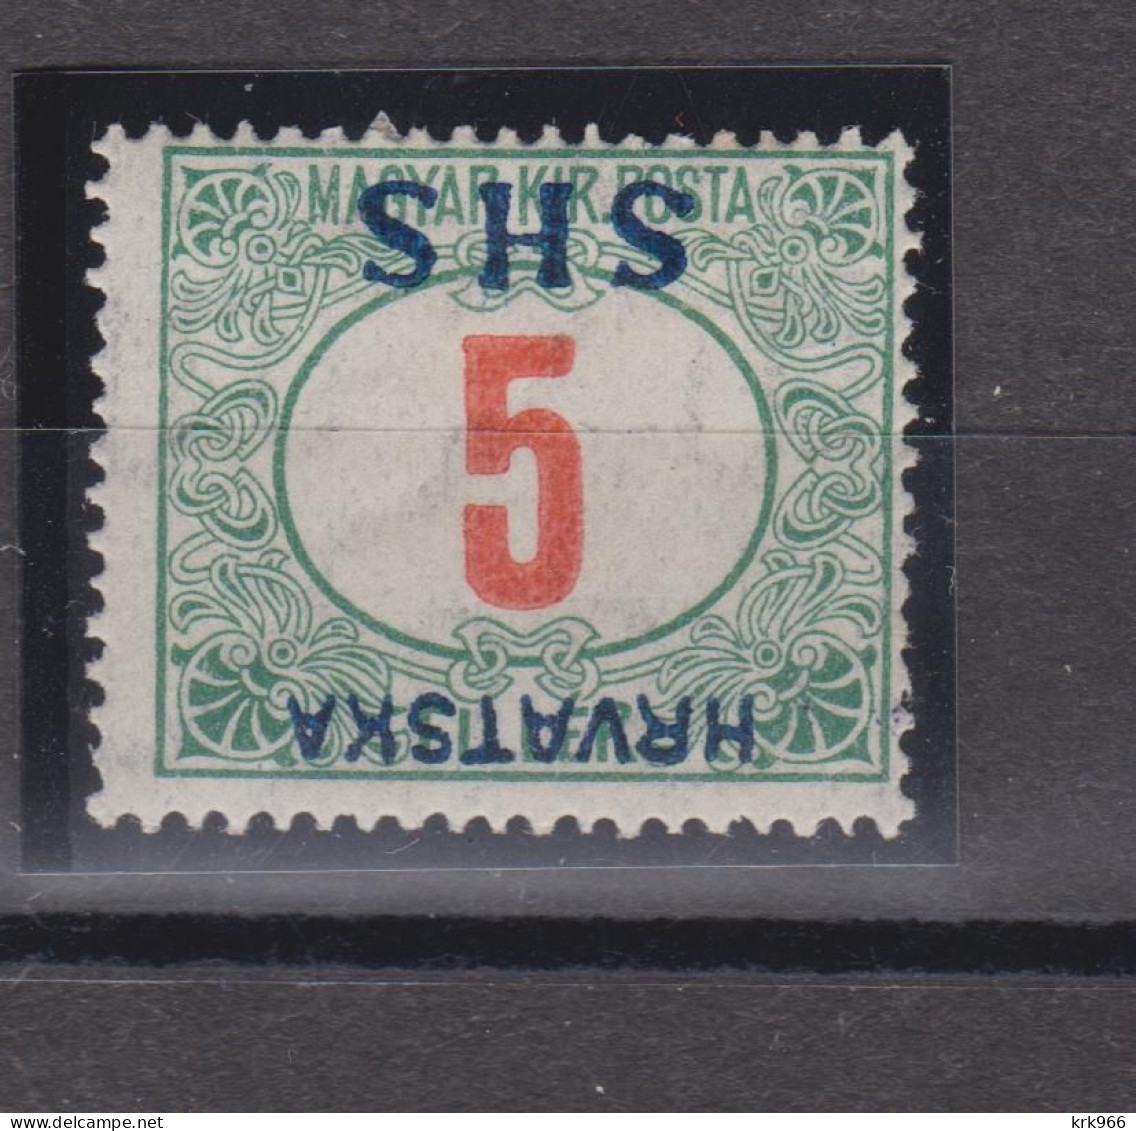 CROATIA  SHS 5 F Postage Due Not Issued  Inverted Ovpt Hinged - Kroatien